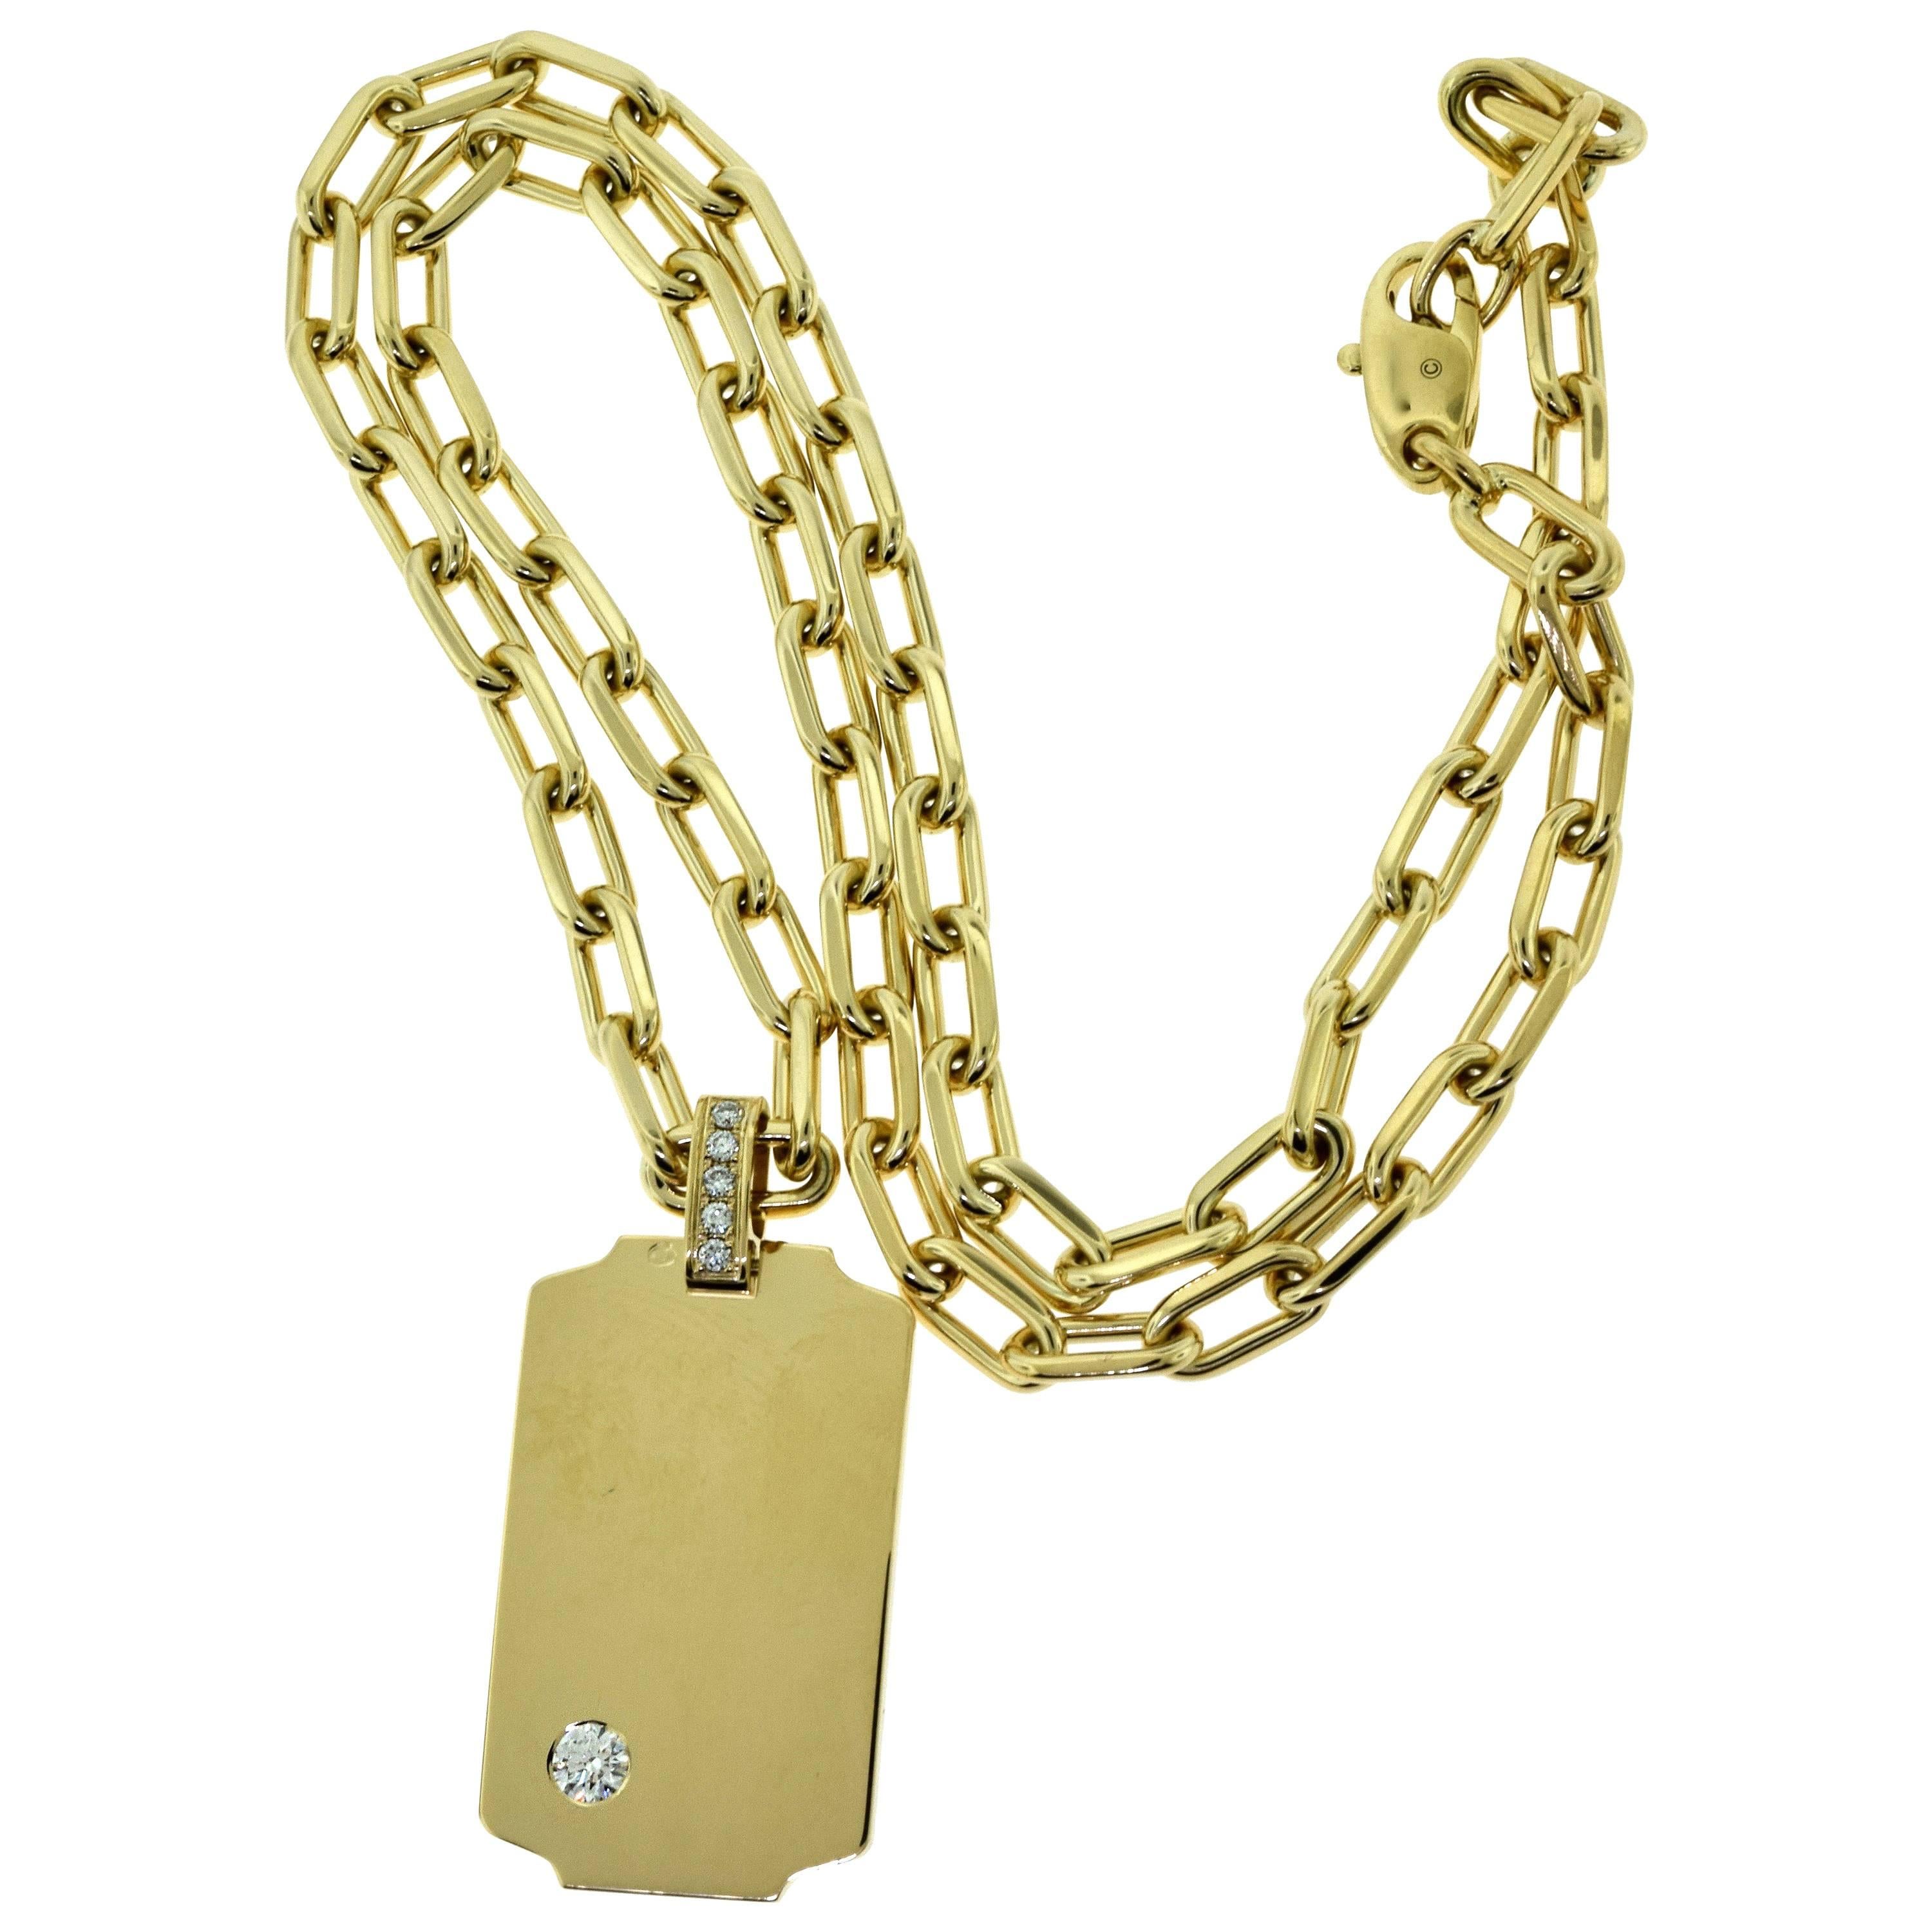 Cartier Yellow Gold Dog Tag Pendant Necklace with Cartier Chain